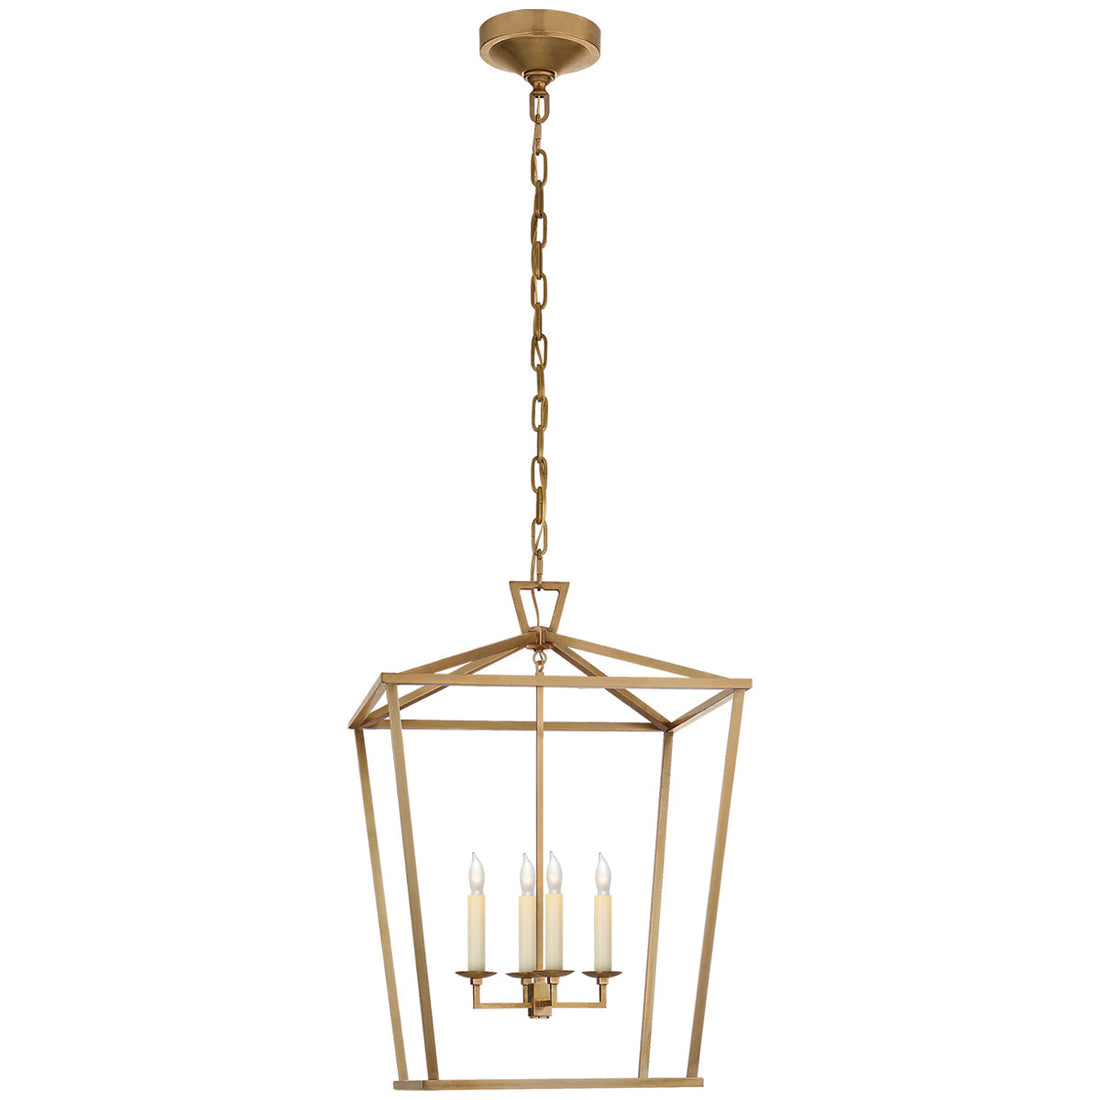 EF CHAPMAN for VISUAL COMFORT Zodiac Pendant Light in Antiqued Brass